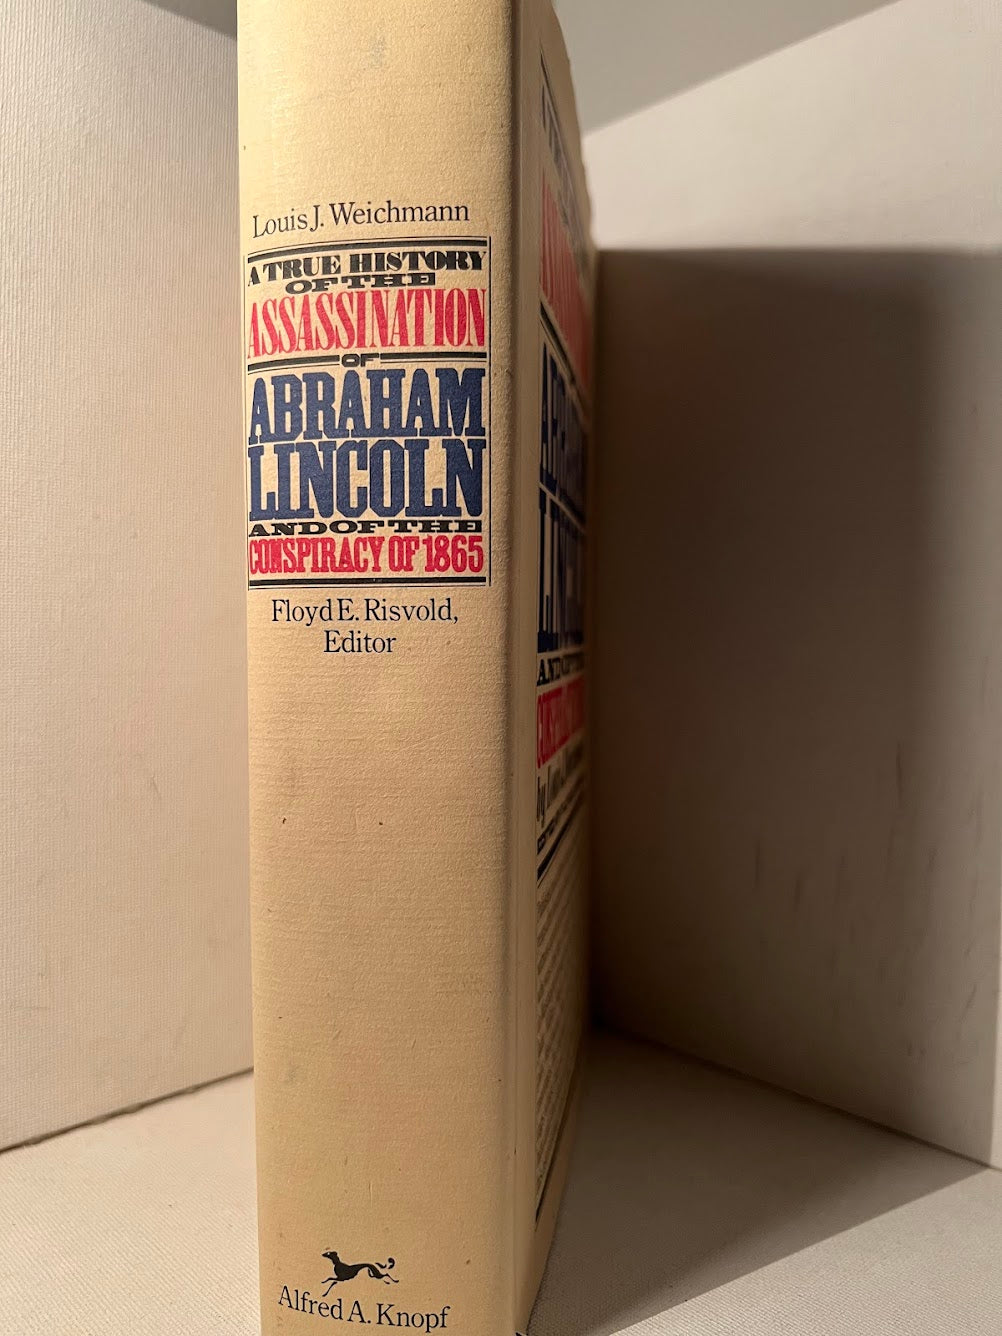 A True History of the Assassination of Abraham Lincoln and the Conspiracy of 1865 by Louis J. Weichmann